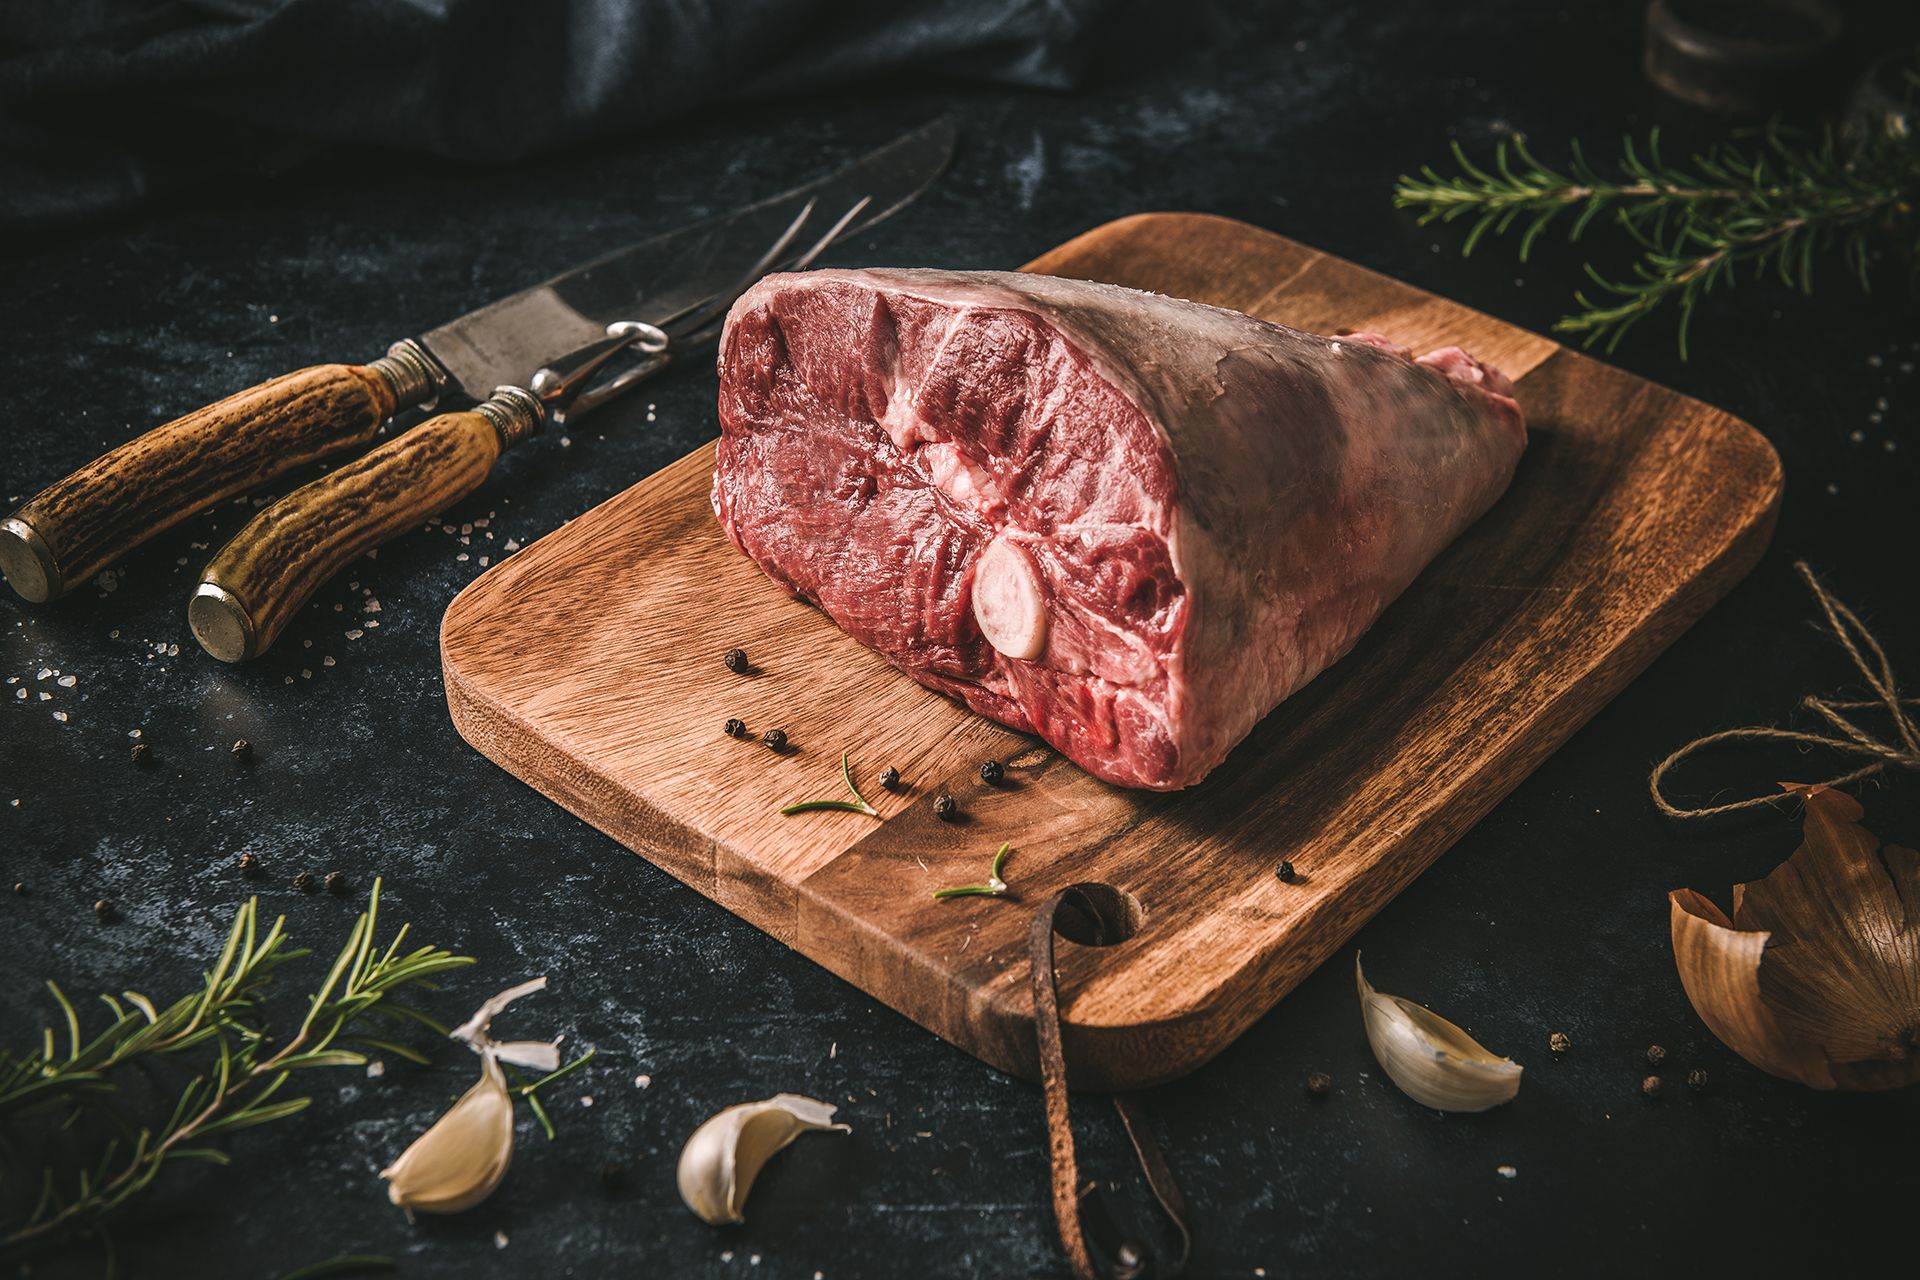 Quality British Lamb joint set on a chopping board. The image illustrates the quality and premium cuts available from Pickstock Foods